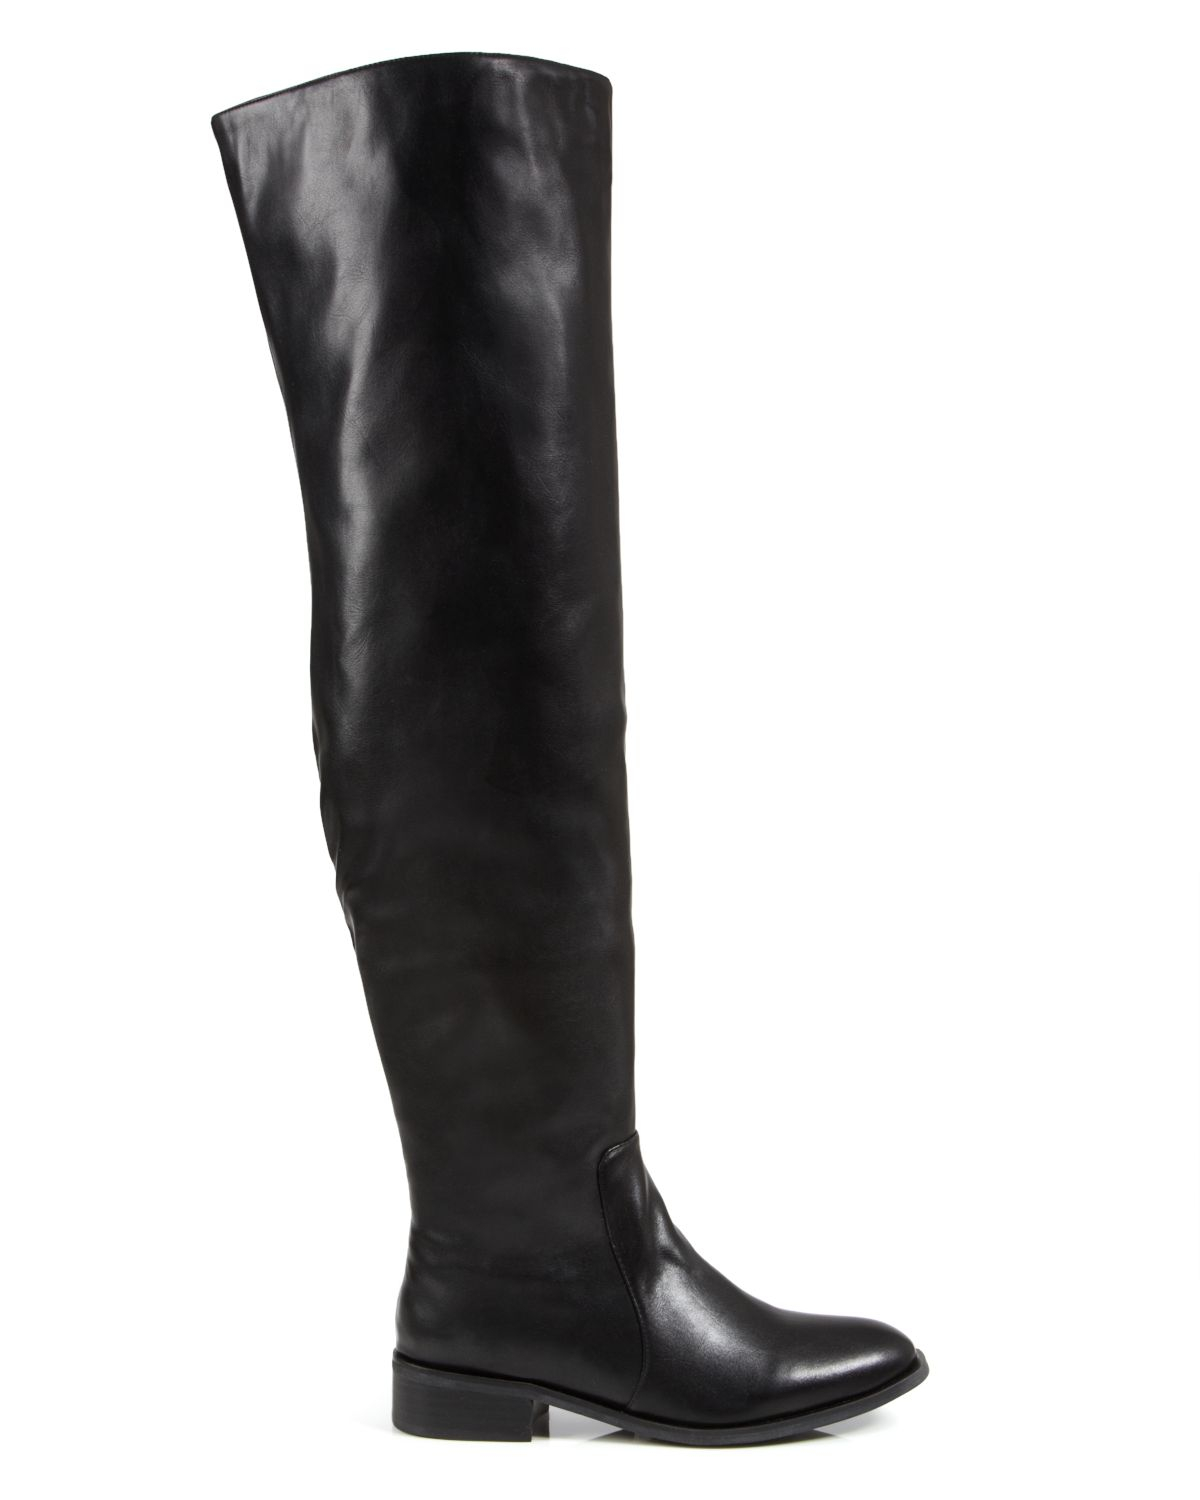 Jeffrey Campbell Leather Over The Knee Boots - Bizou in Black - Lyst